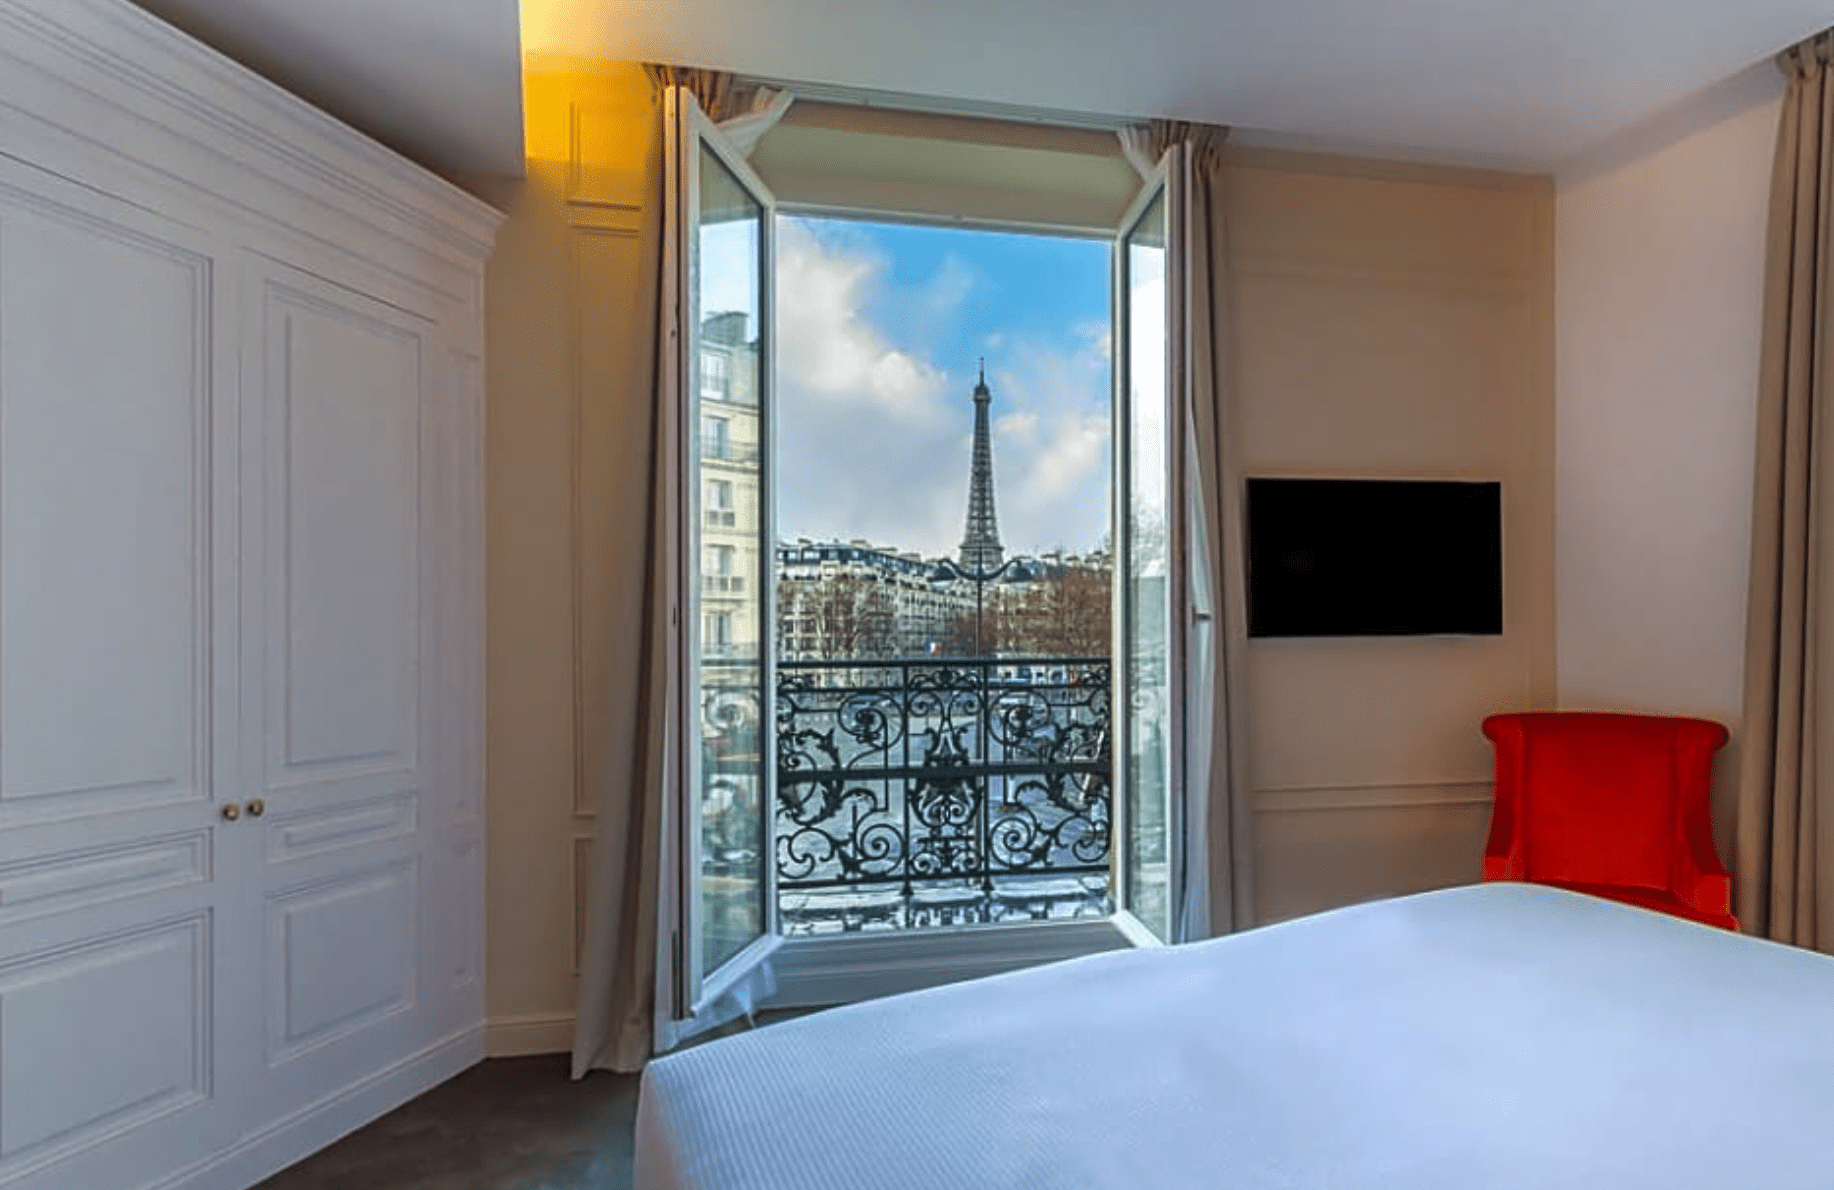 Hotel La Comtesse Room Interior with view of the Eiffel Tower